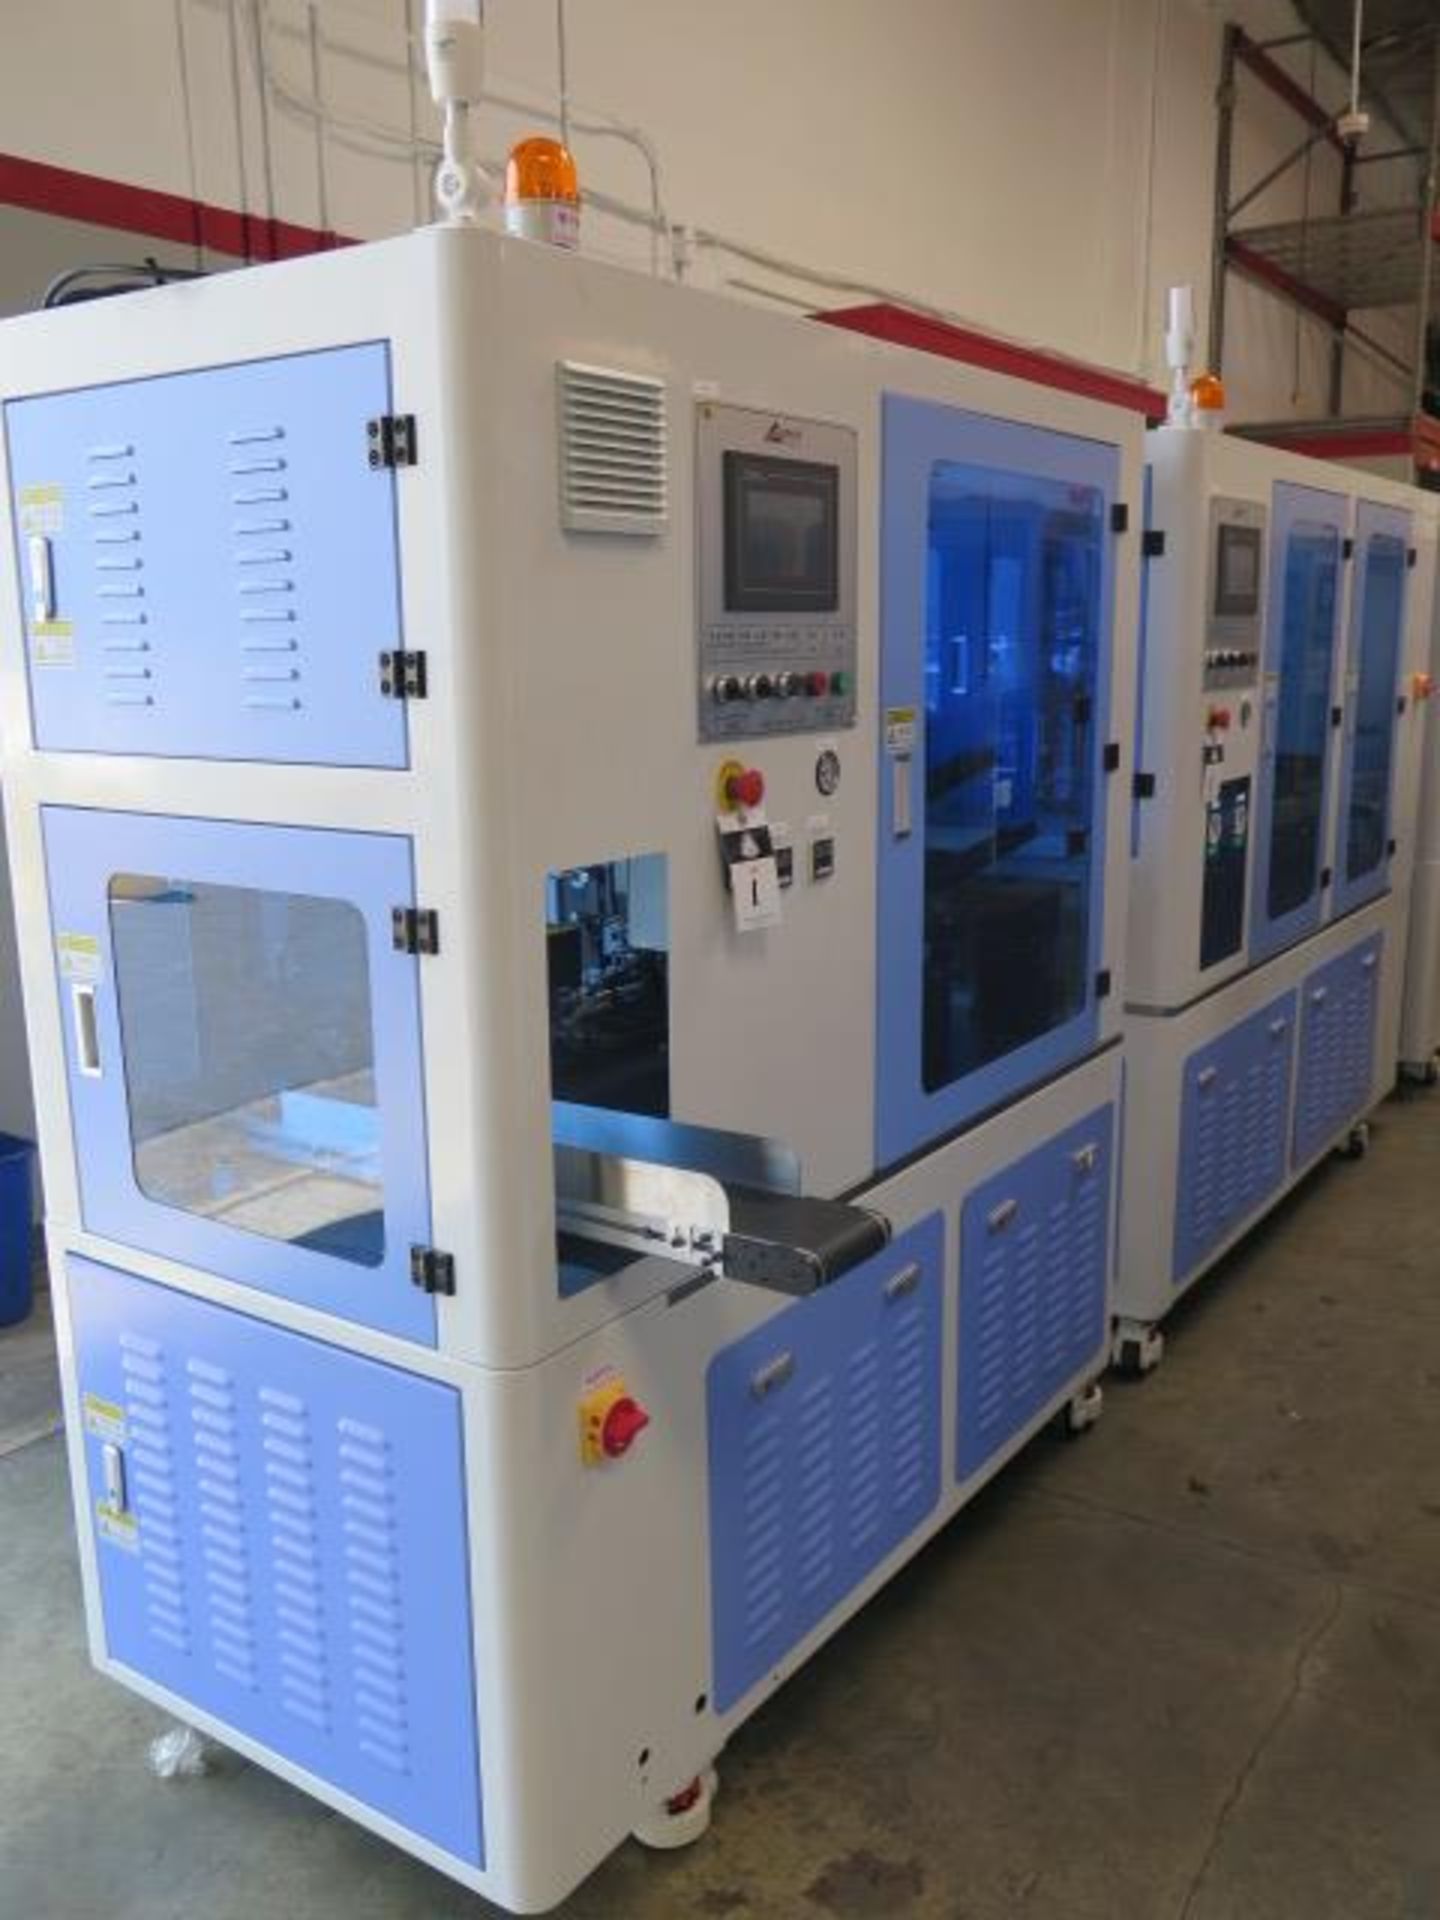 2/2021 Gereke mdl. GRK-TWO1 Cassette Assembly and Packaging Line s/n GRK20210227037, SOLD AS IS